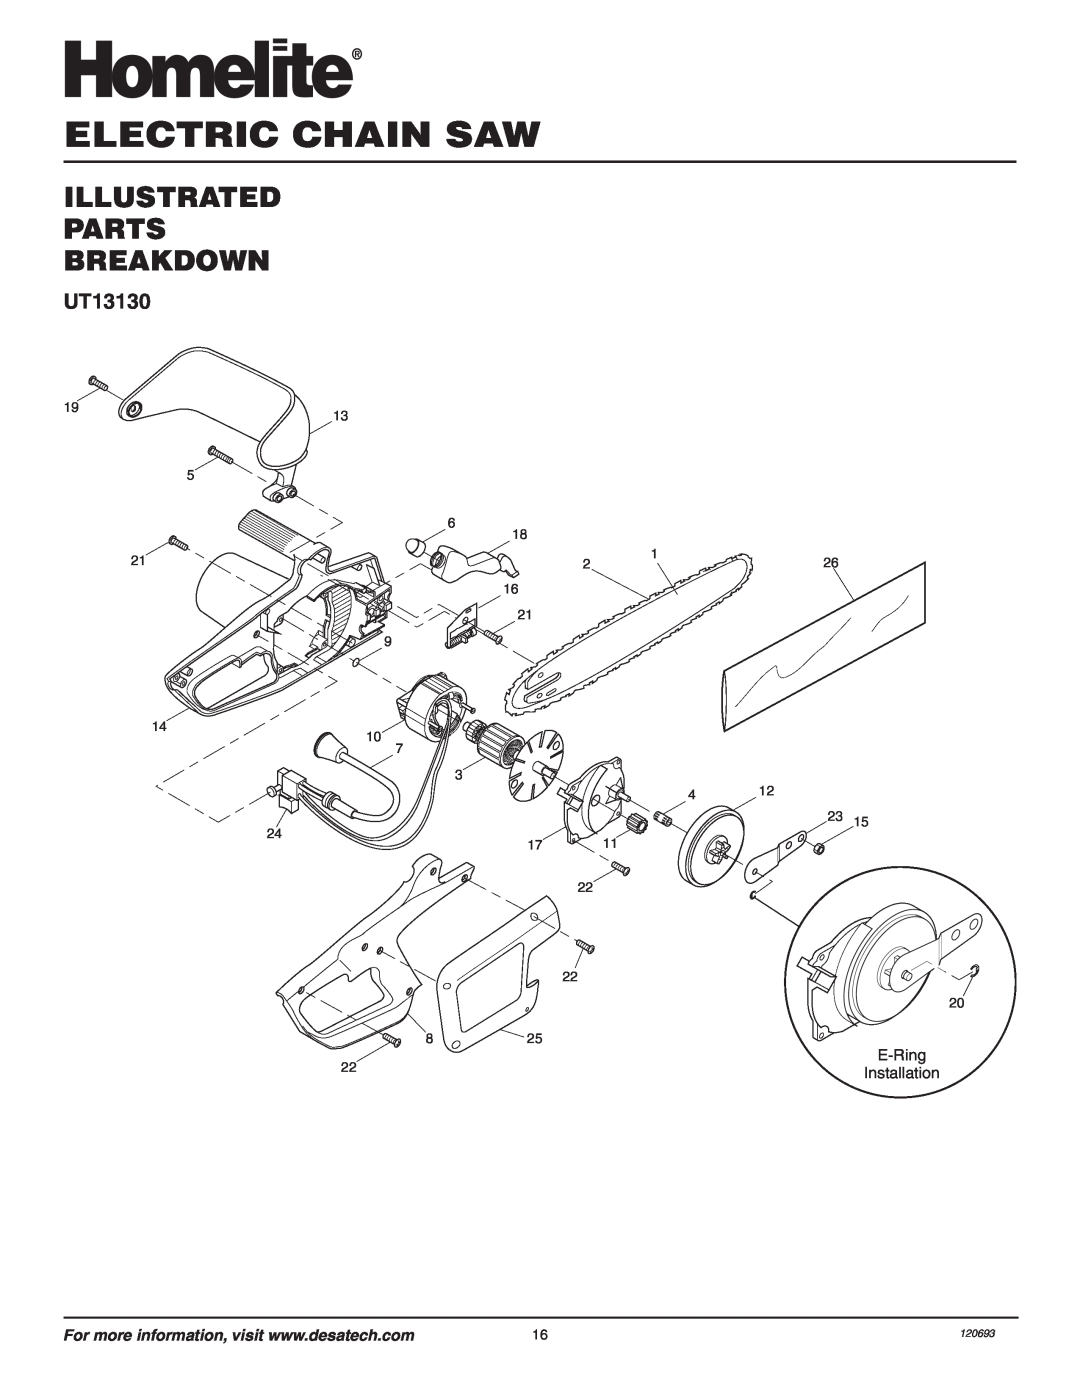 Homelite UT13130 owner manual Illustrated Parts Breakdown, Electric Chain Saw, E-Ring, Installation, 120693 